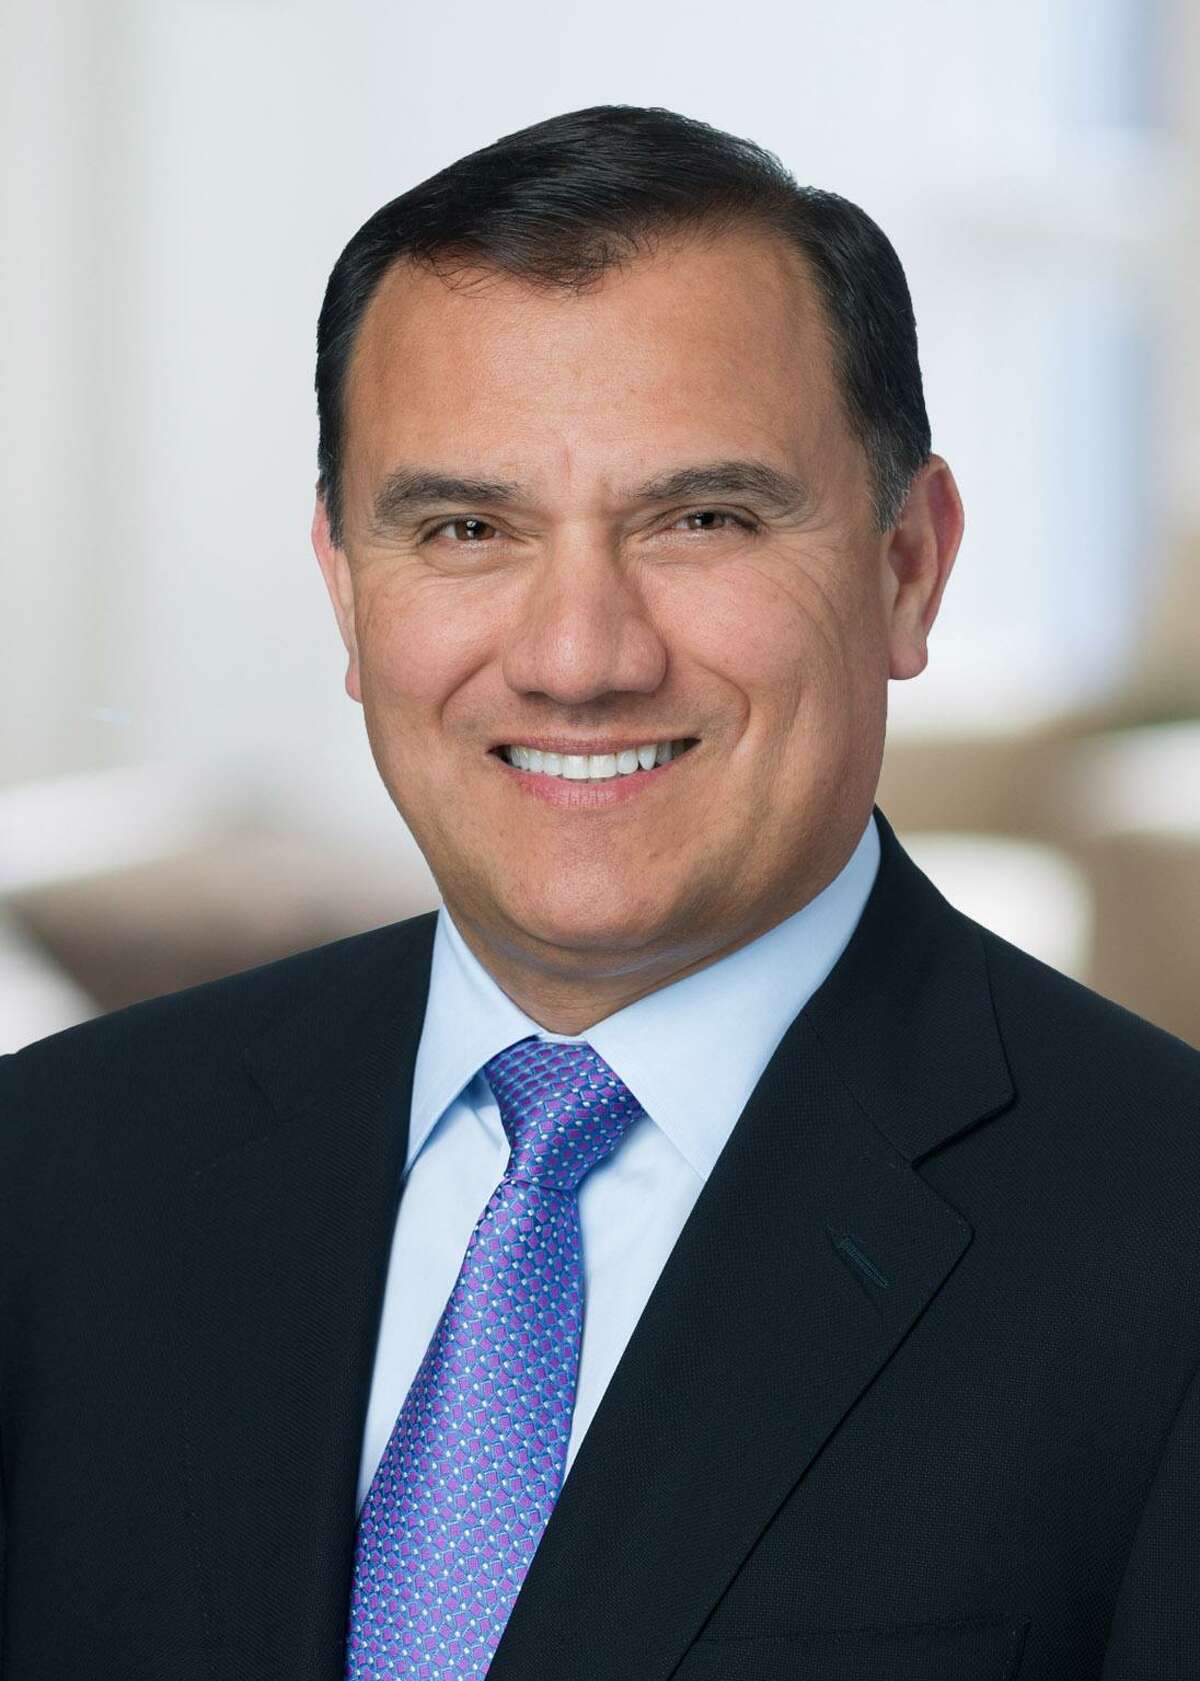 Dennis Arriola, currently an executive vice president with San Diego-based Sempra Energy, has been name as the new chief executive officer of Orange-based Avangrid.